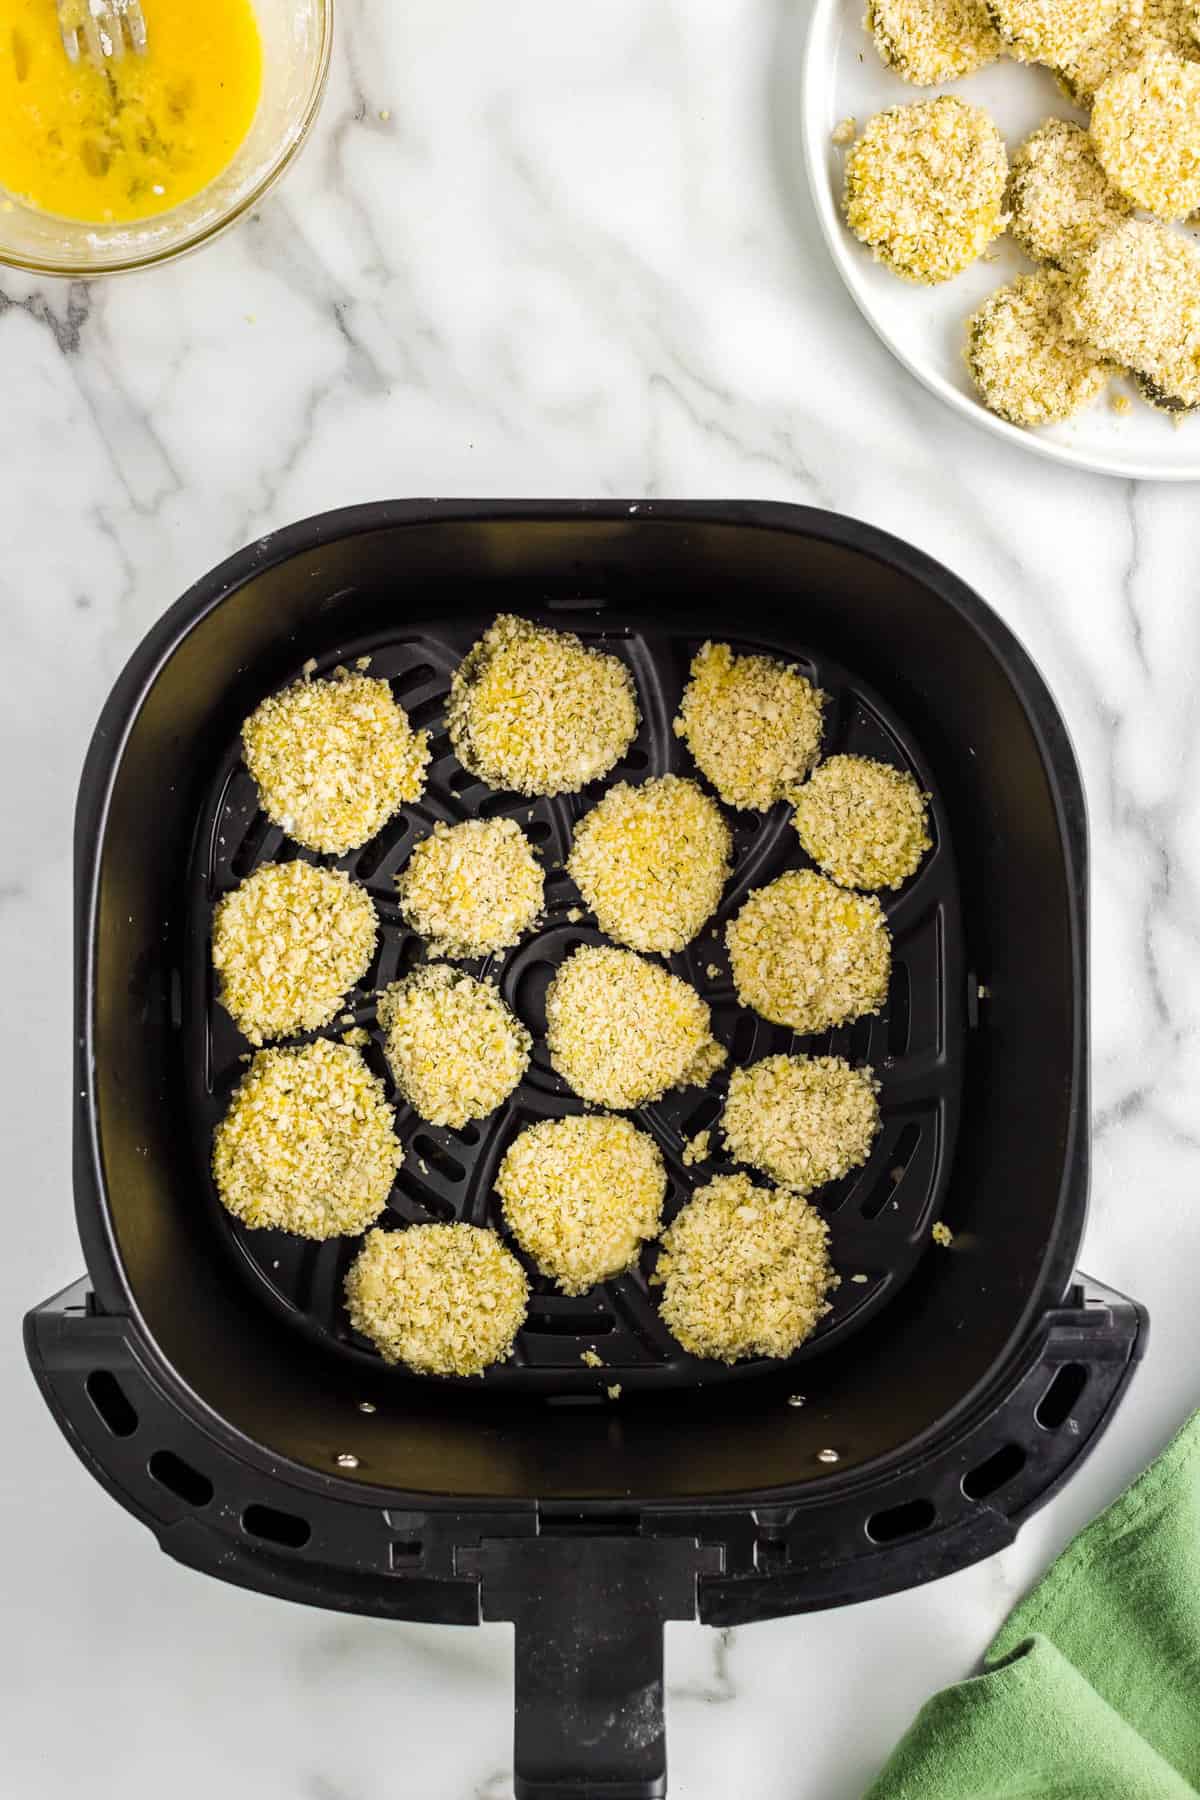 Cooking Coated Pickle Slices in Air Fryer Until Golden Brown for Pickle Chip Recipe